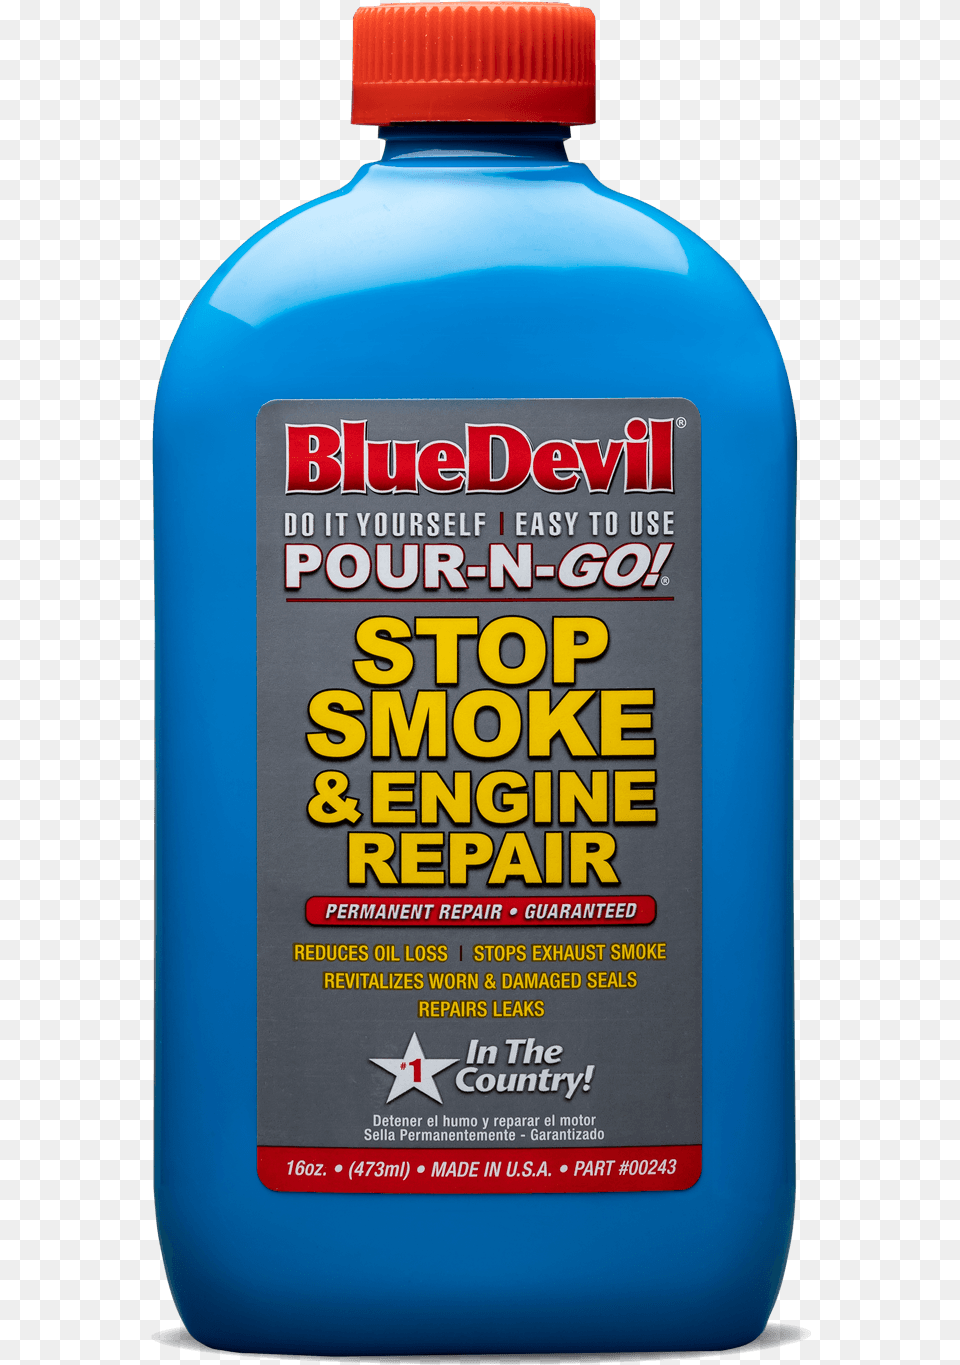 Stop Smoke And Engine Repair Leak Point Bluedevil Blue Devil Stop Smoke, Bottle Free Png Download